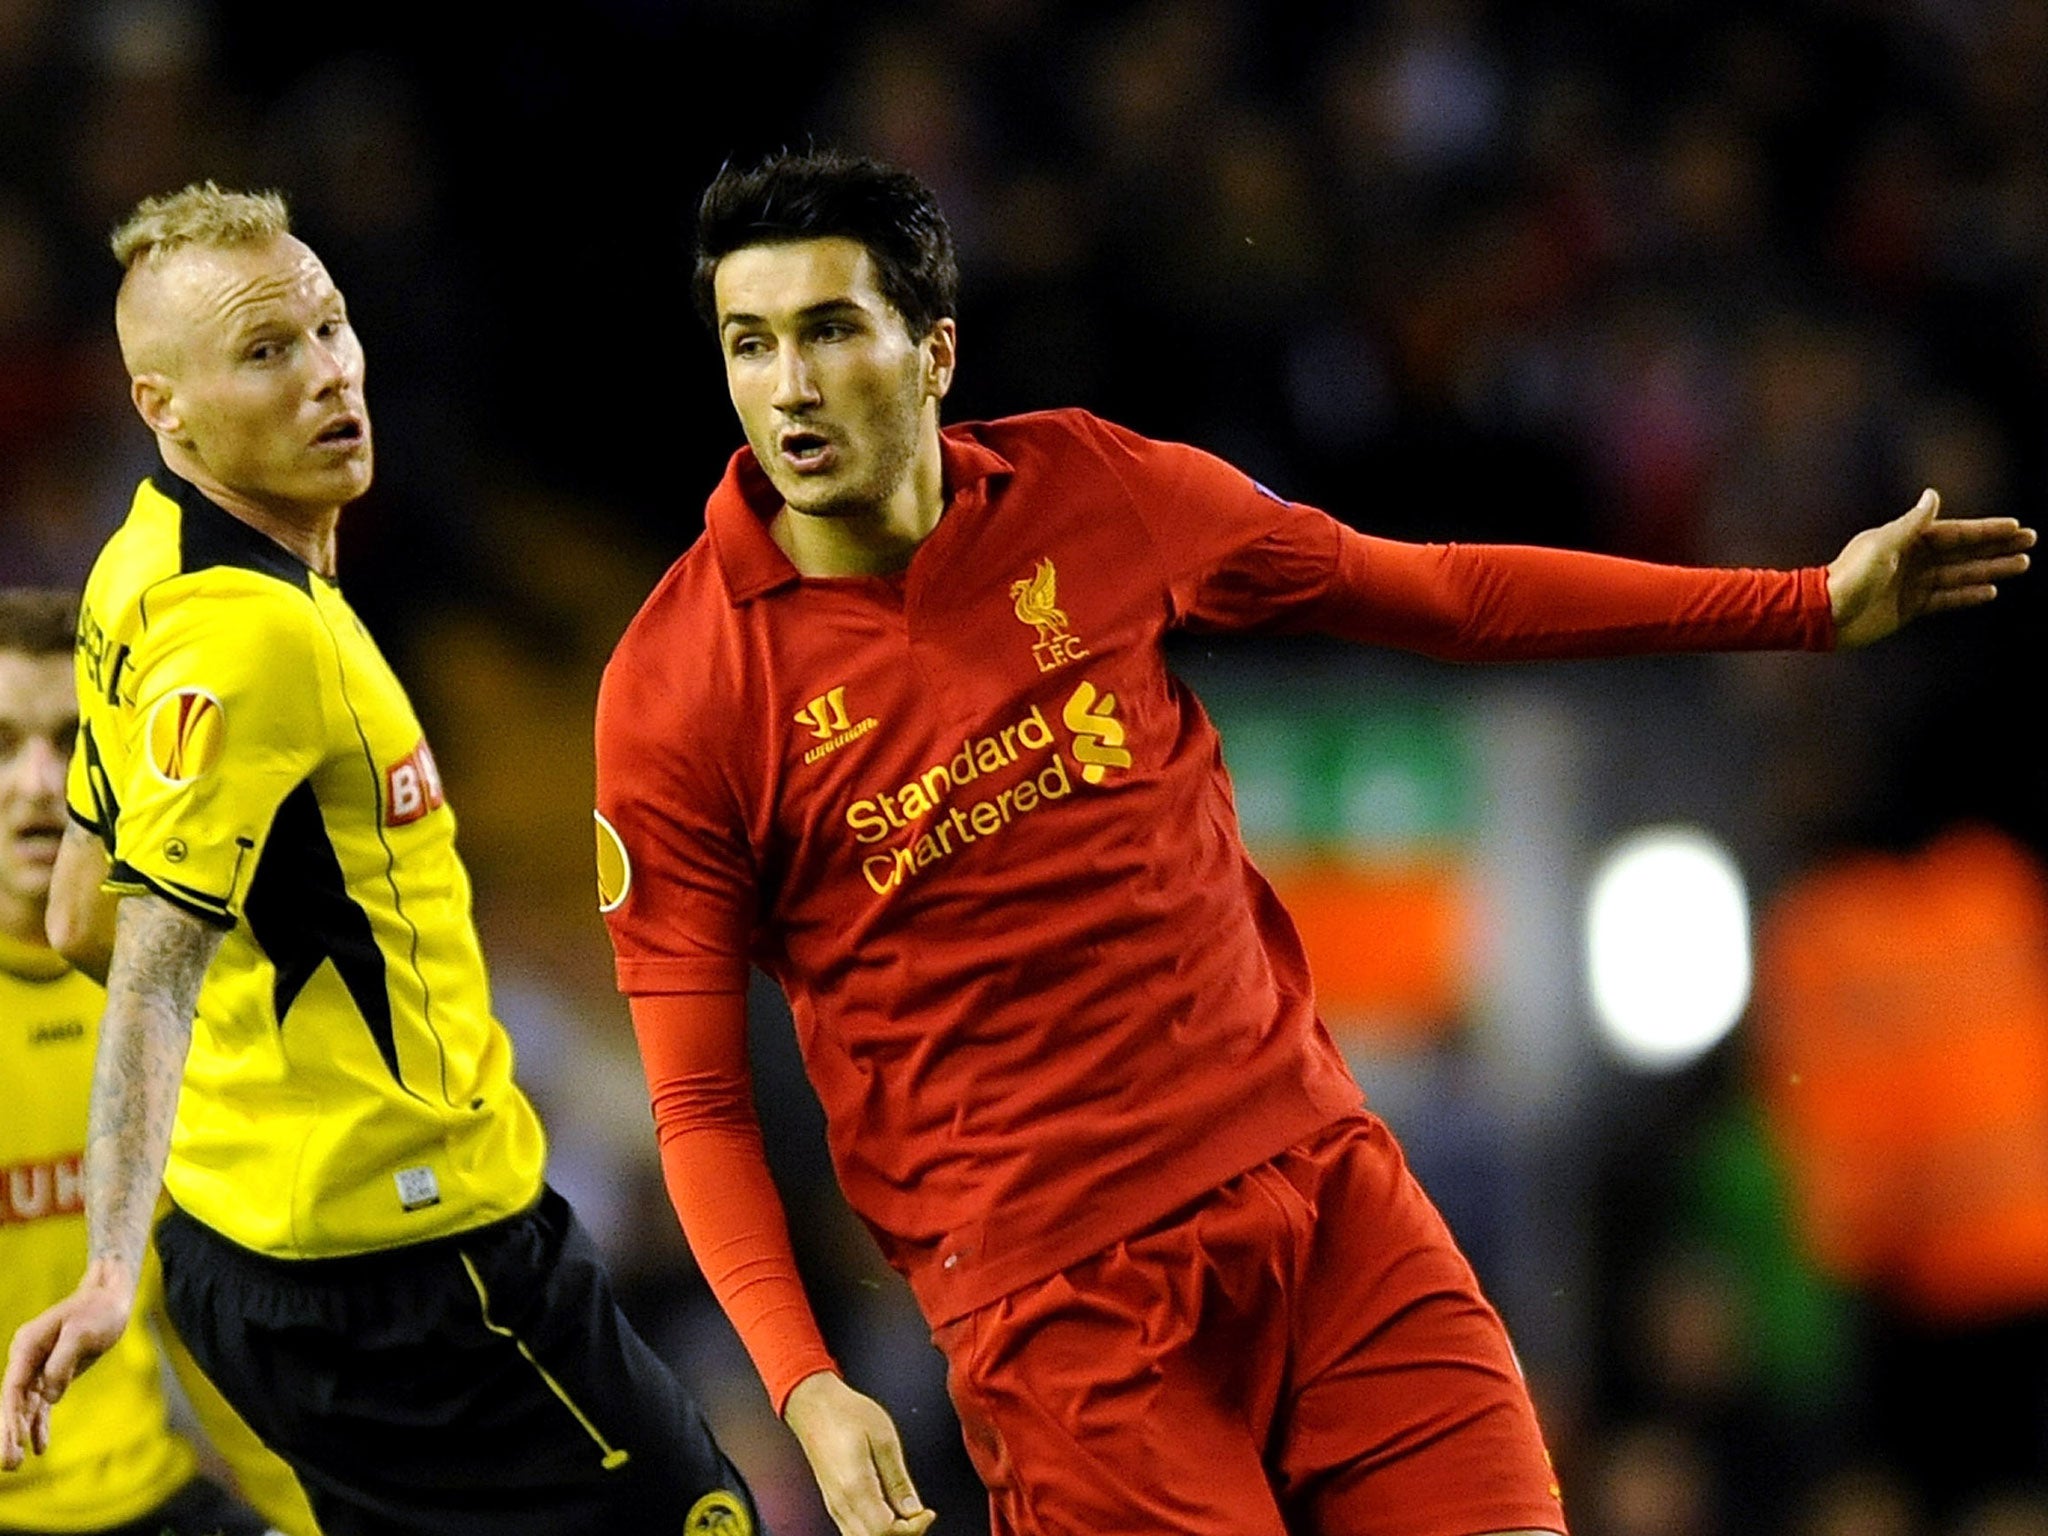 Nuri Sahin struggled during his short spell with Liverpool